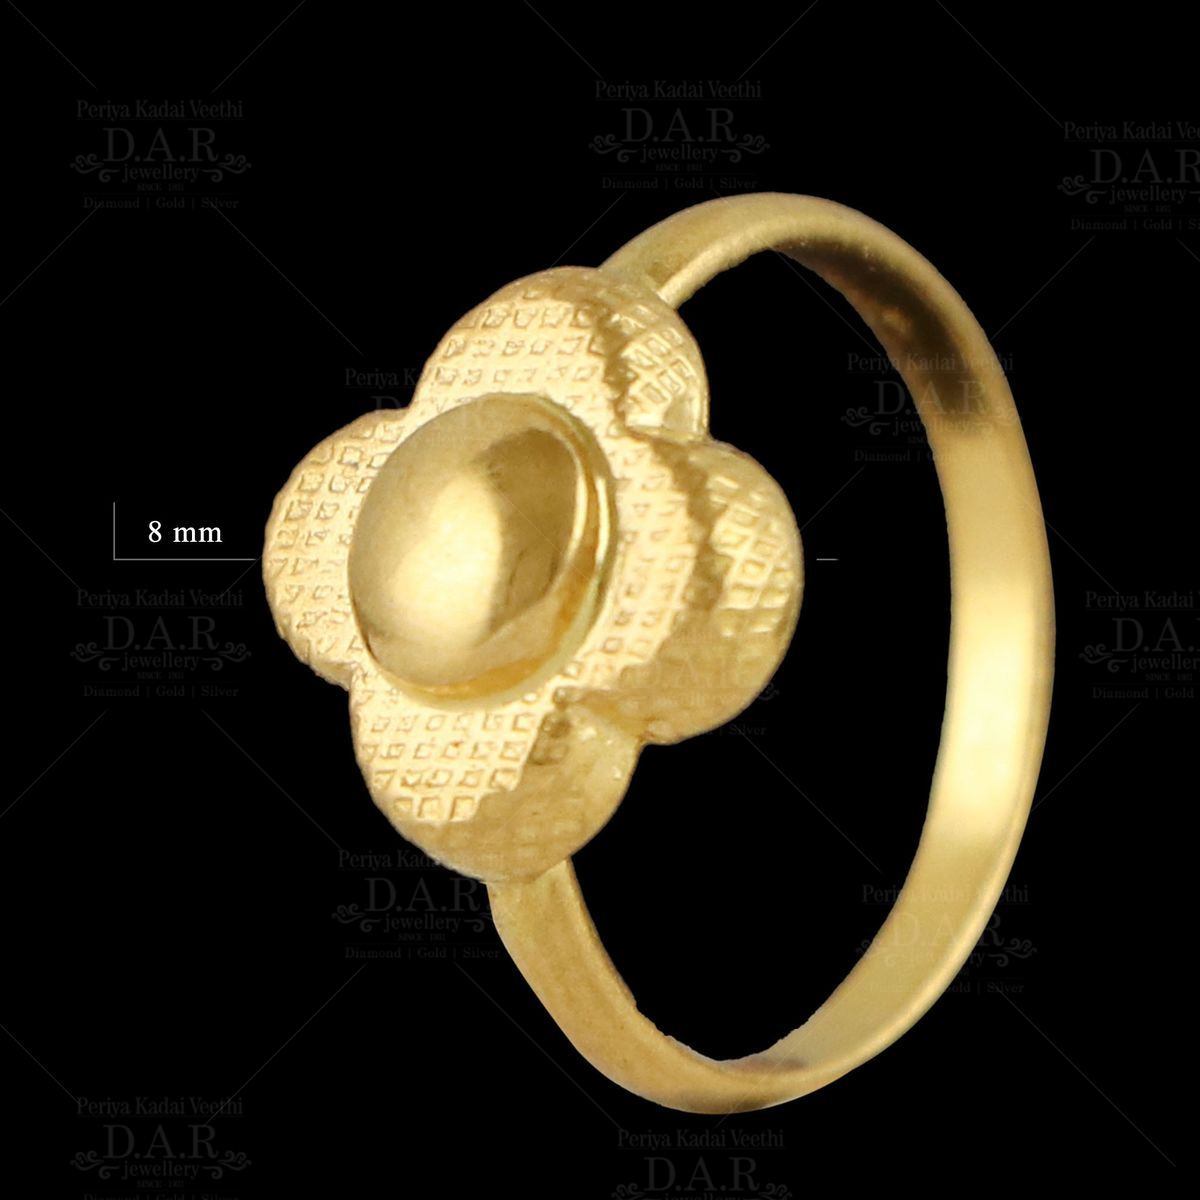 French Oval Shaped Diamonds and Sculpted Gold Ring - FD Gallery